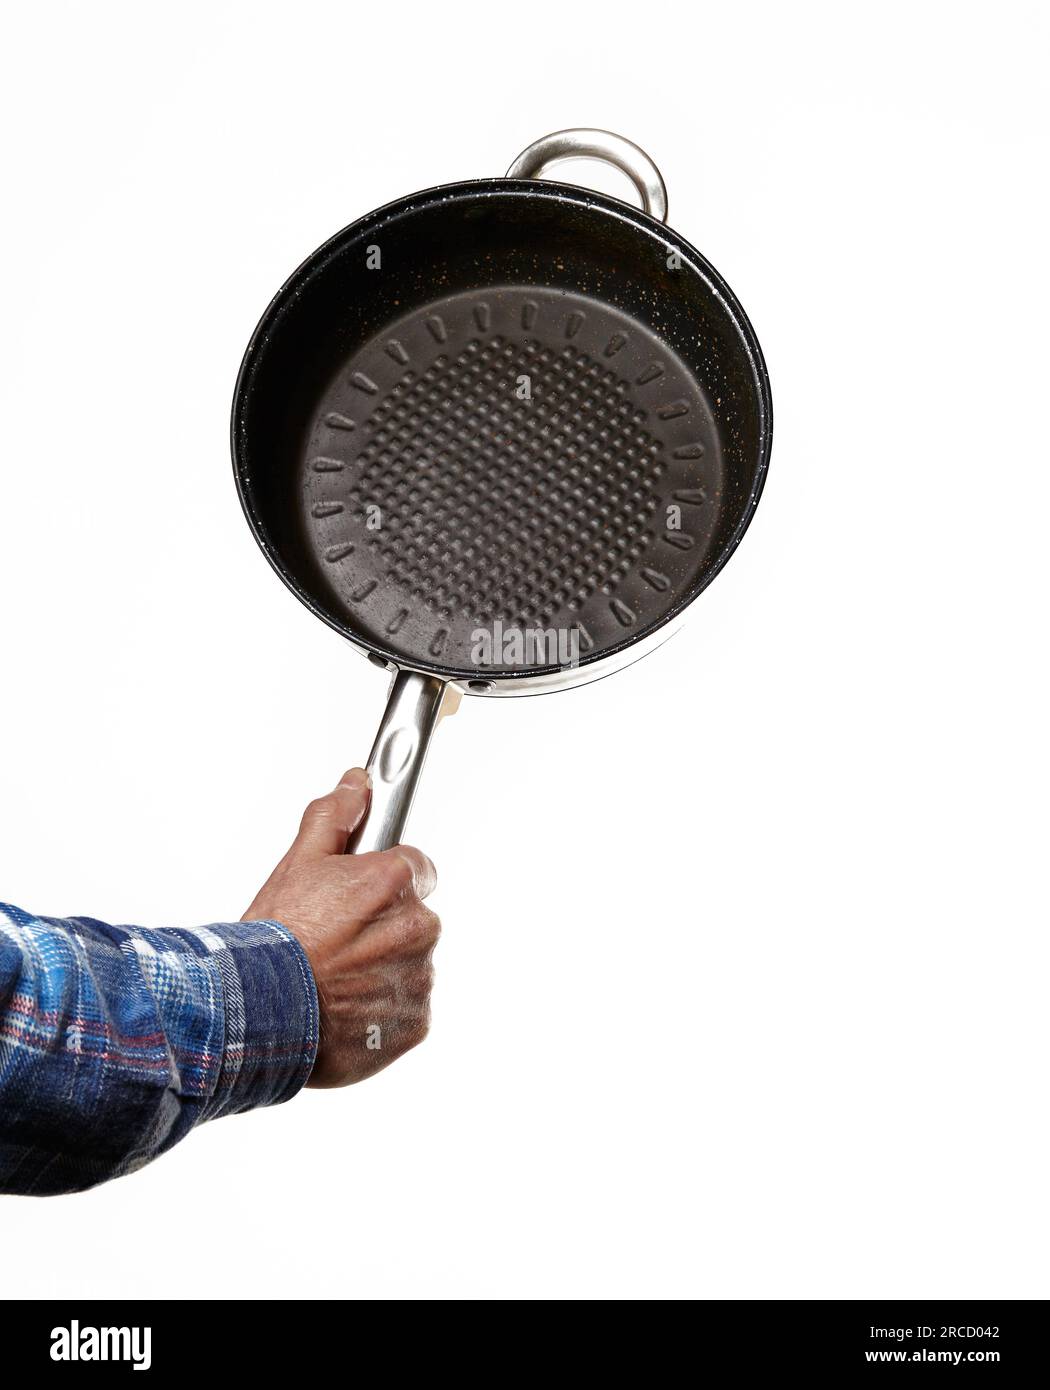 https://c8.alamy.com/comp/2RCD042/mens-hand-holding-frying-pan-isolated-on-white-cooking-concept-frying-pan-use-2RCD042.jpg